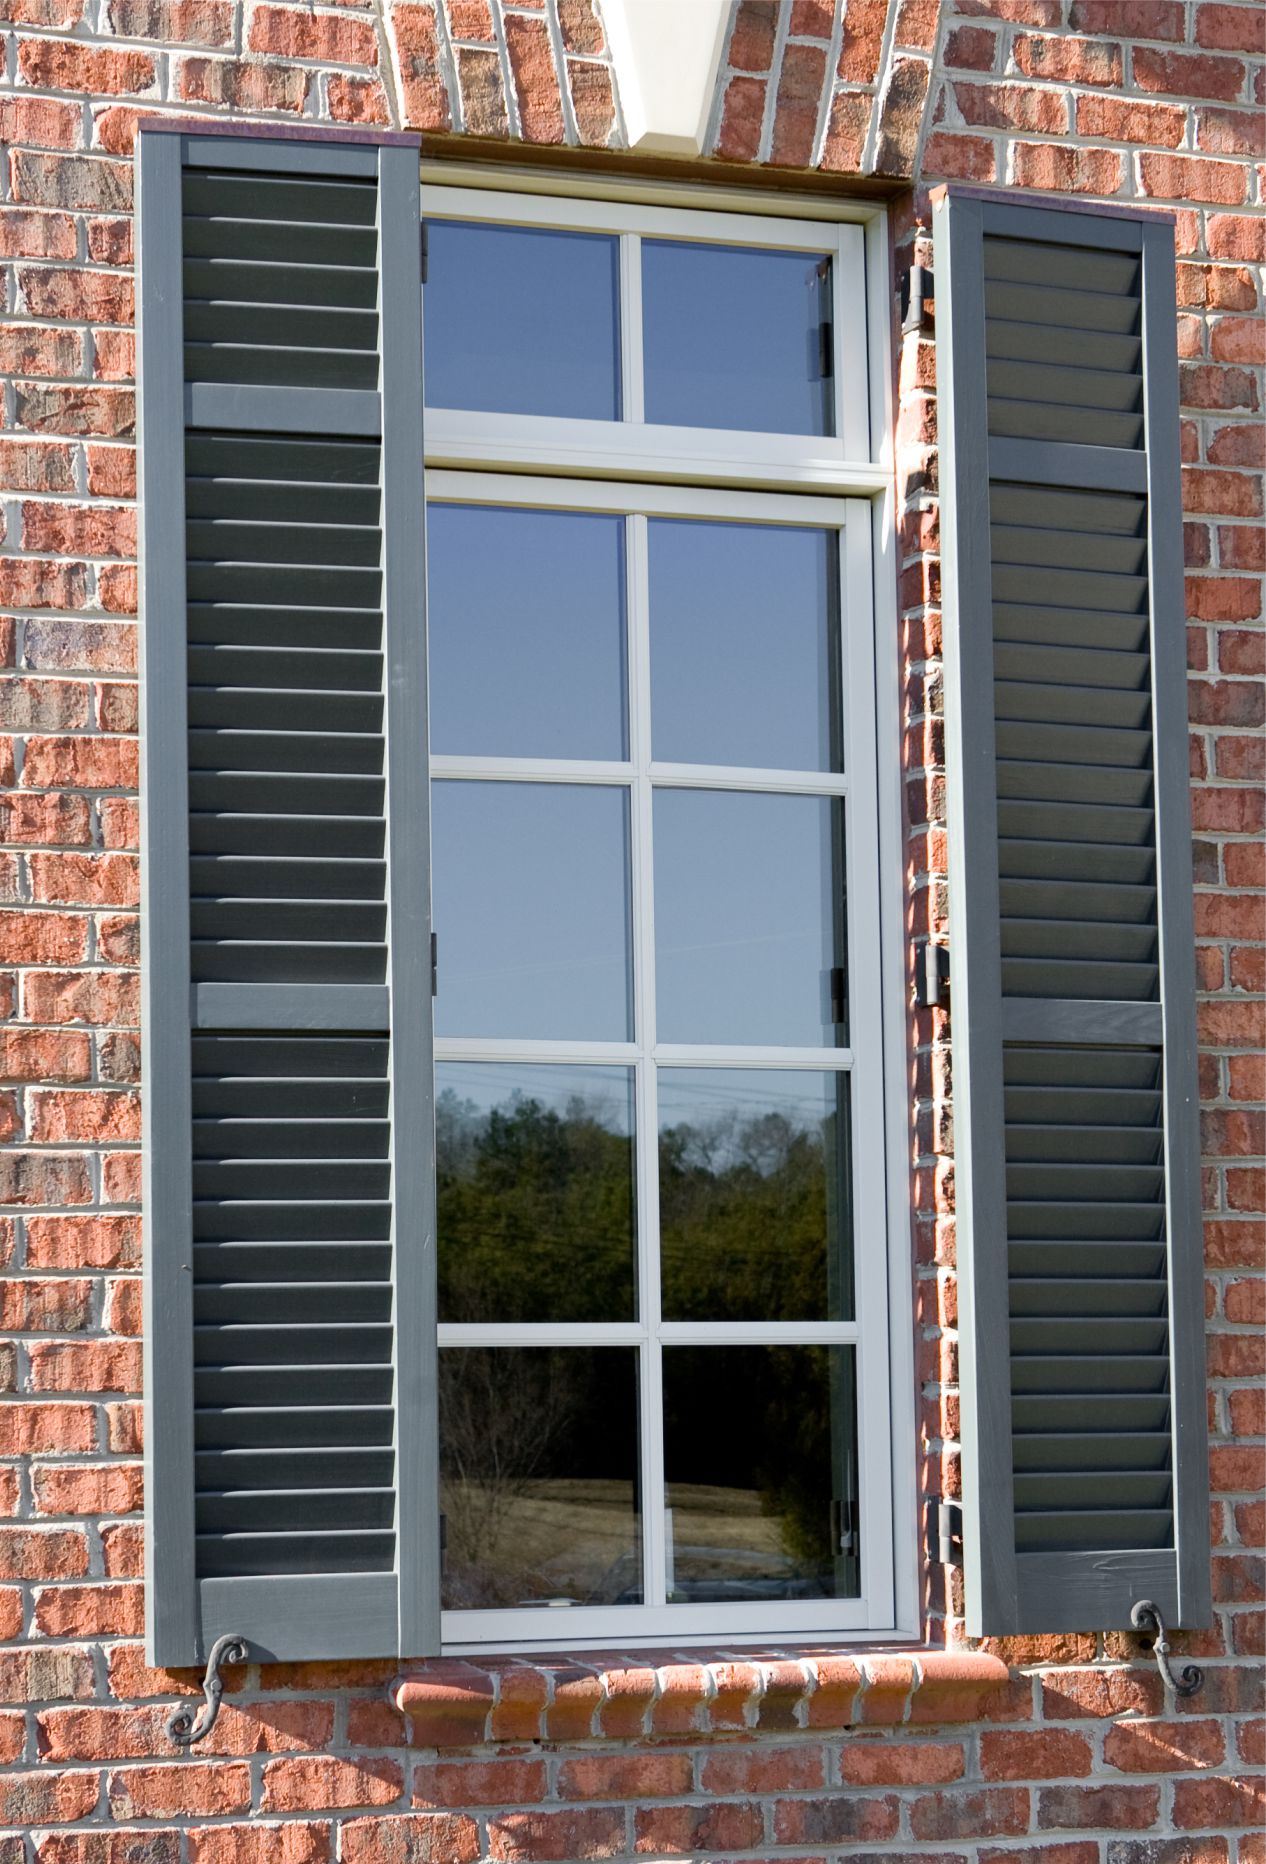 Exterior window shutters on brick home.